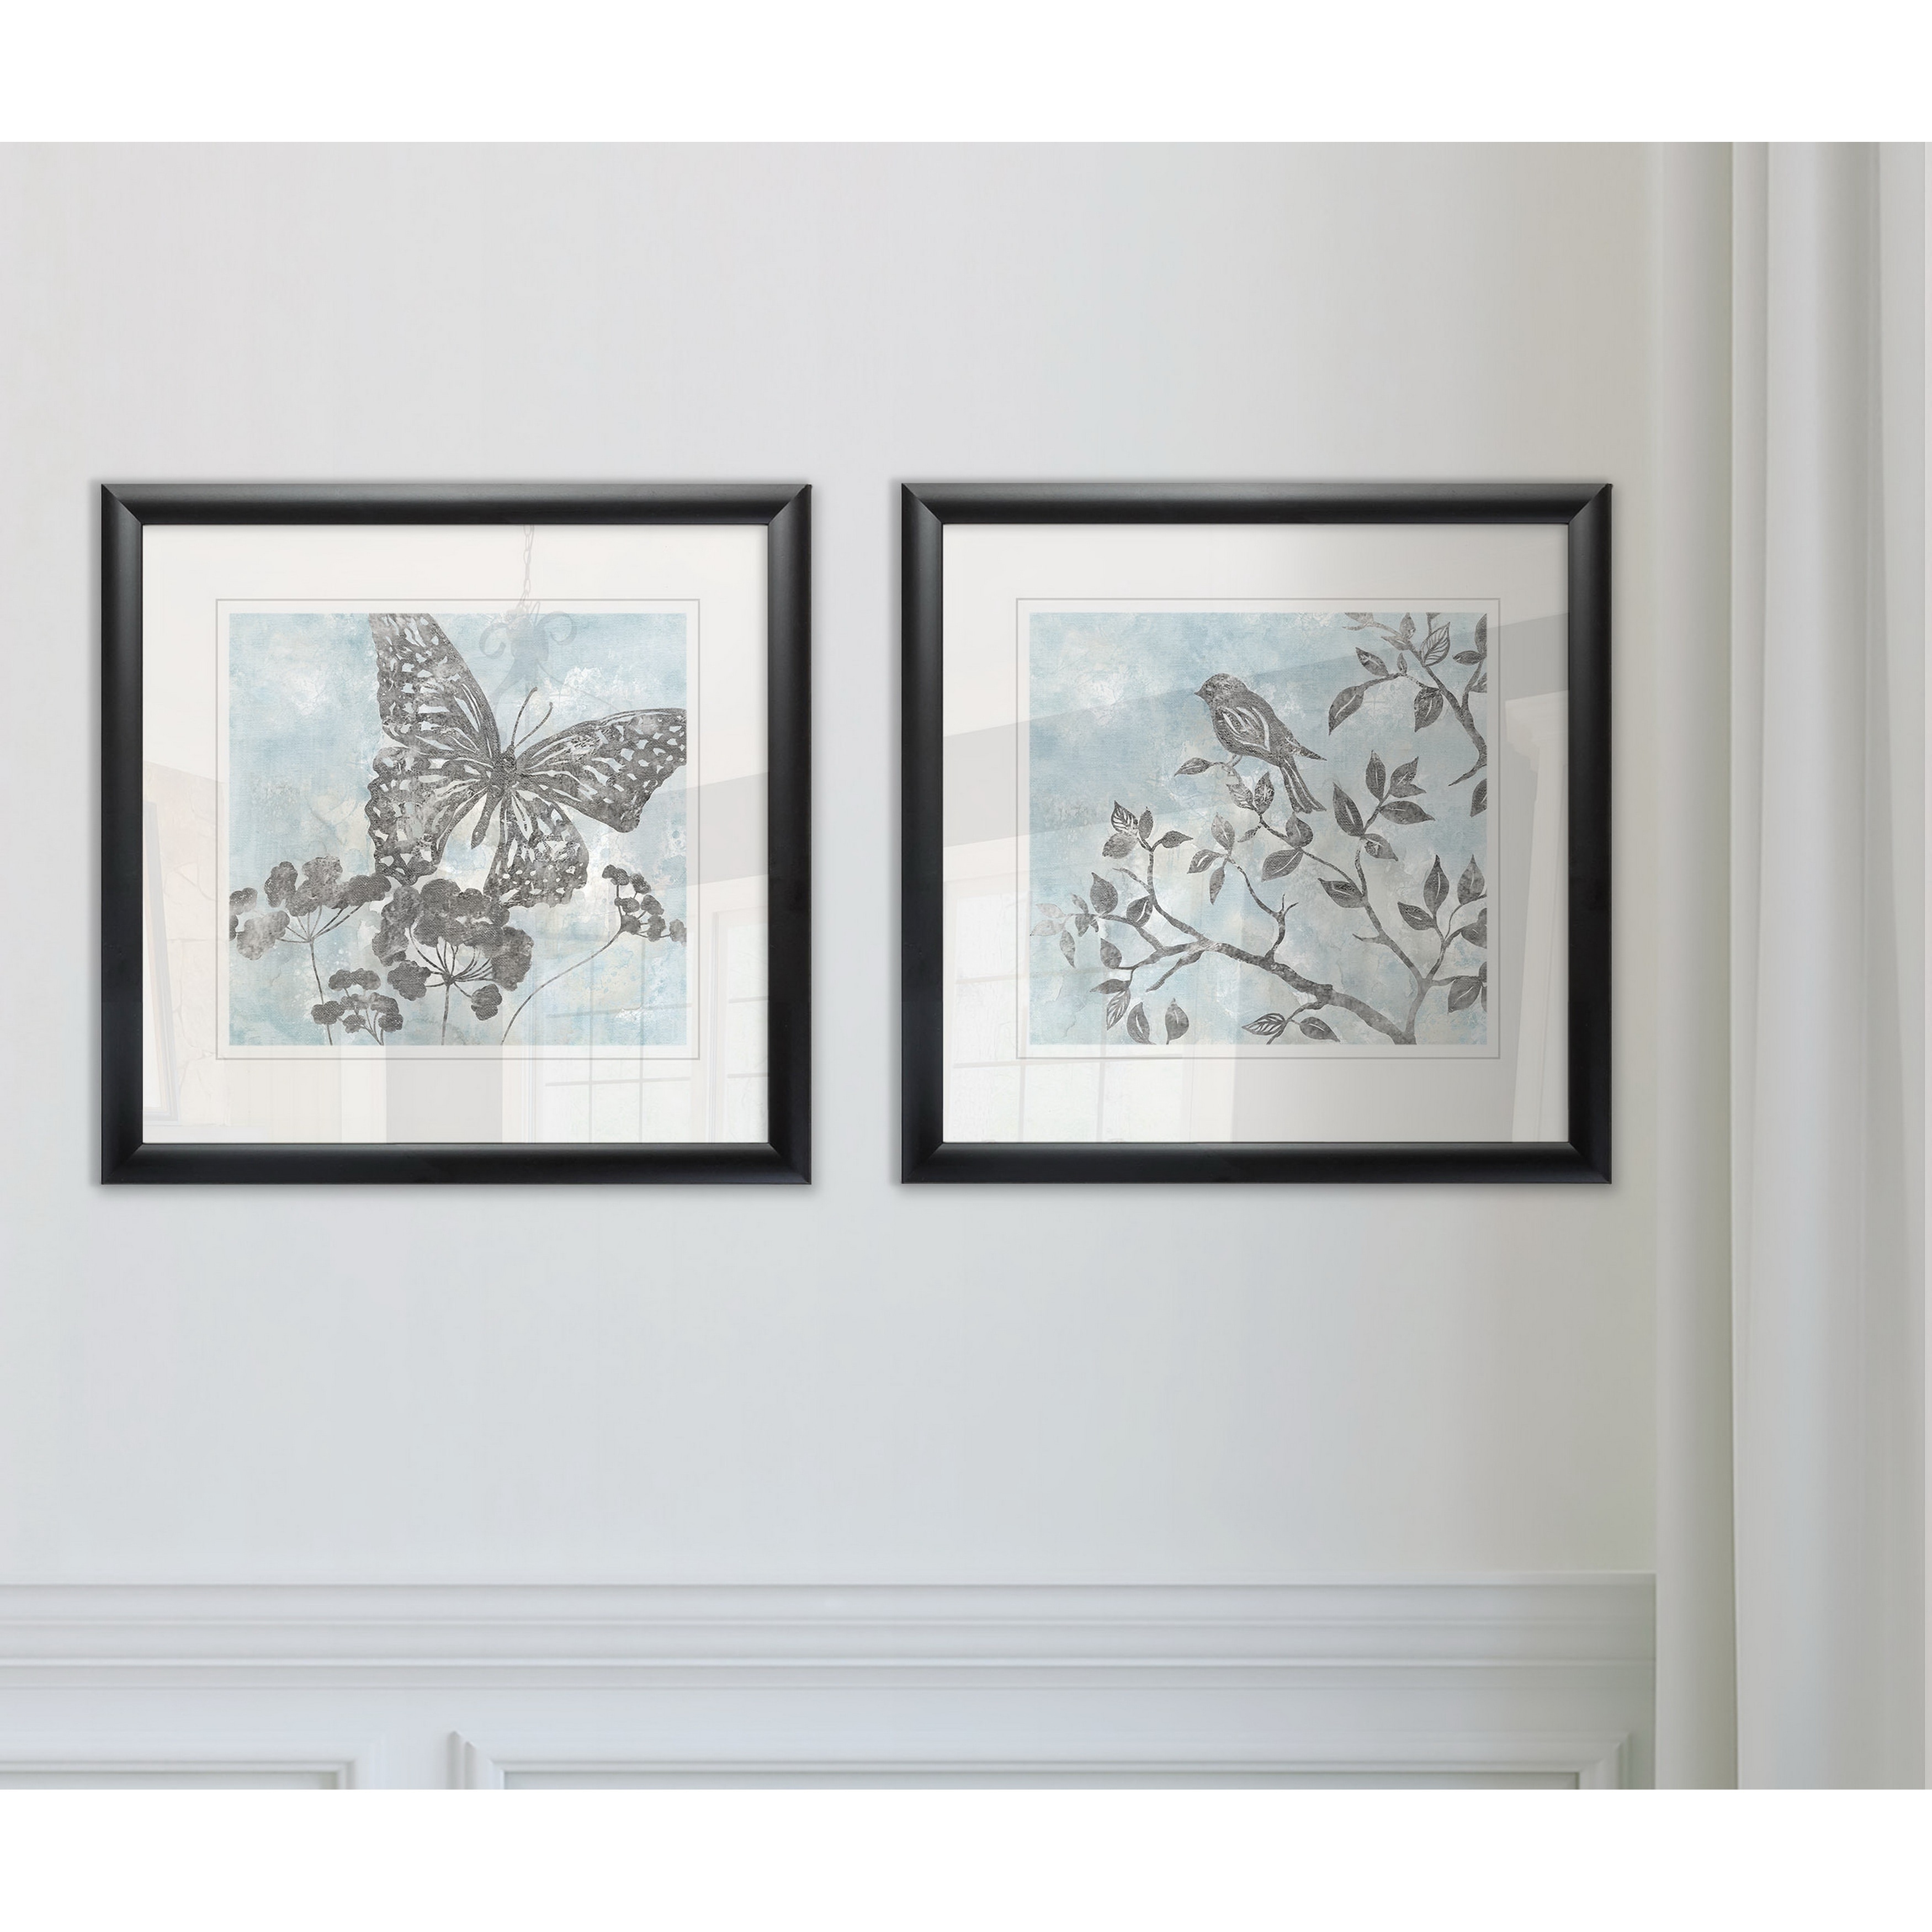 Wexford Home 'Soft Silhouette Butterfly' Framed Giclee Print (Set of 2)